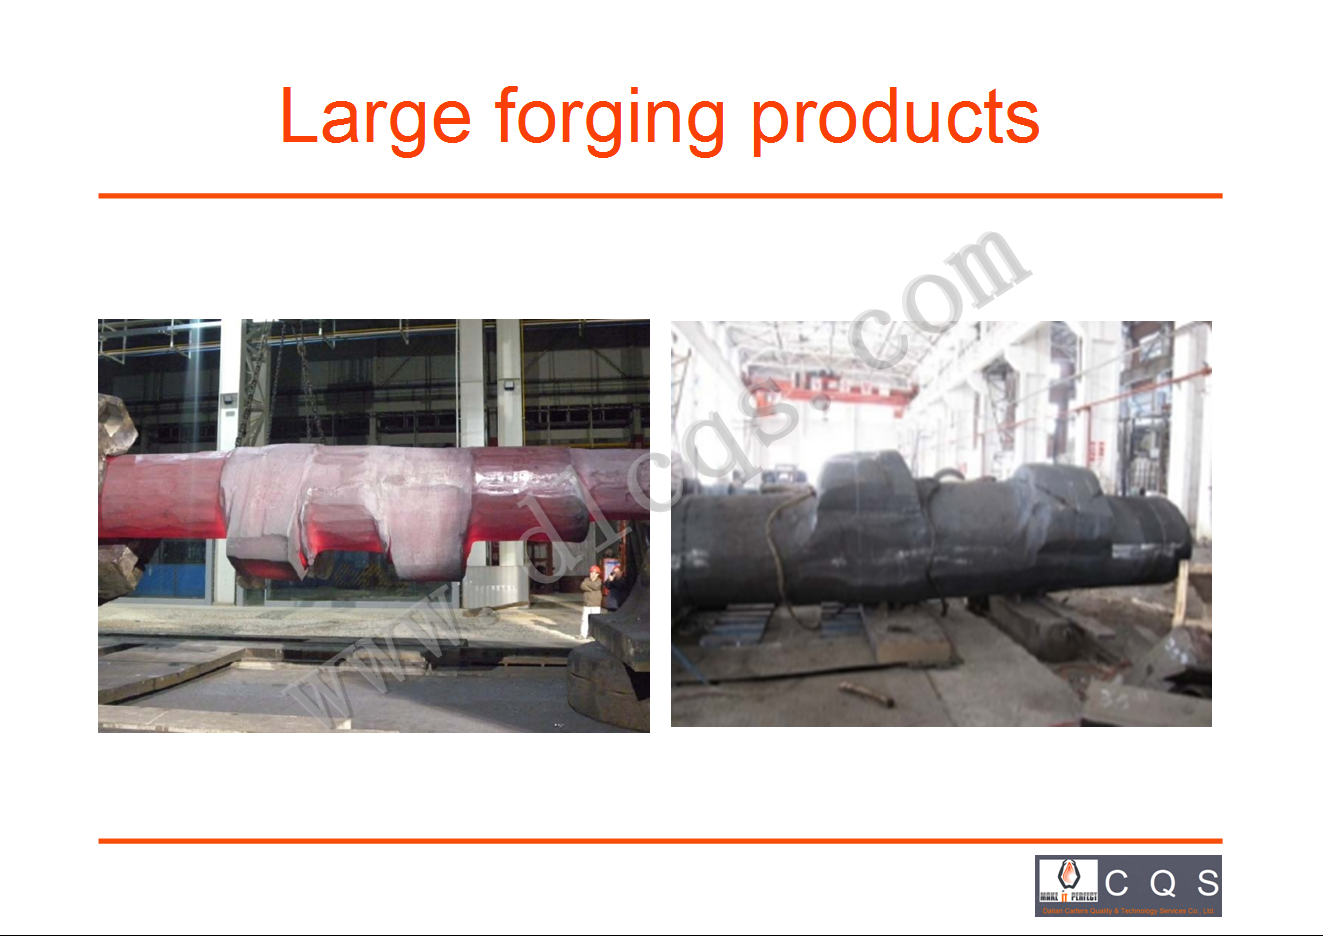 LARGE FORGING PRODUCTS